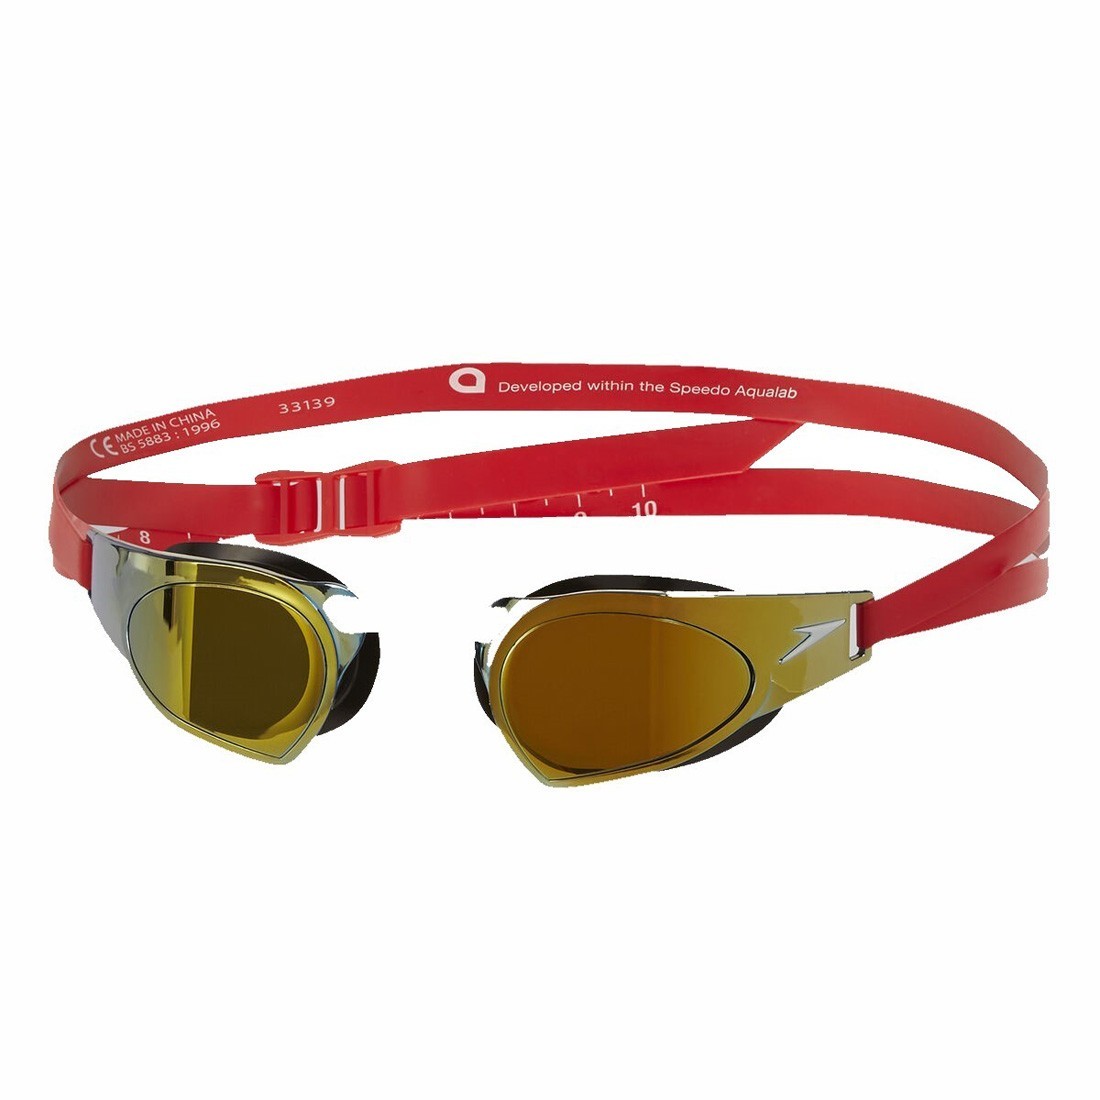 Buy Speedo Fastskin Prime Mirror - Red & Black - Speedo, delivered to your  home | The Outfit